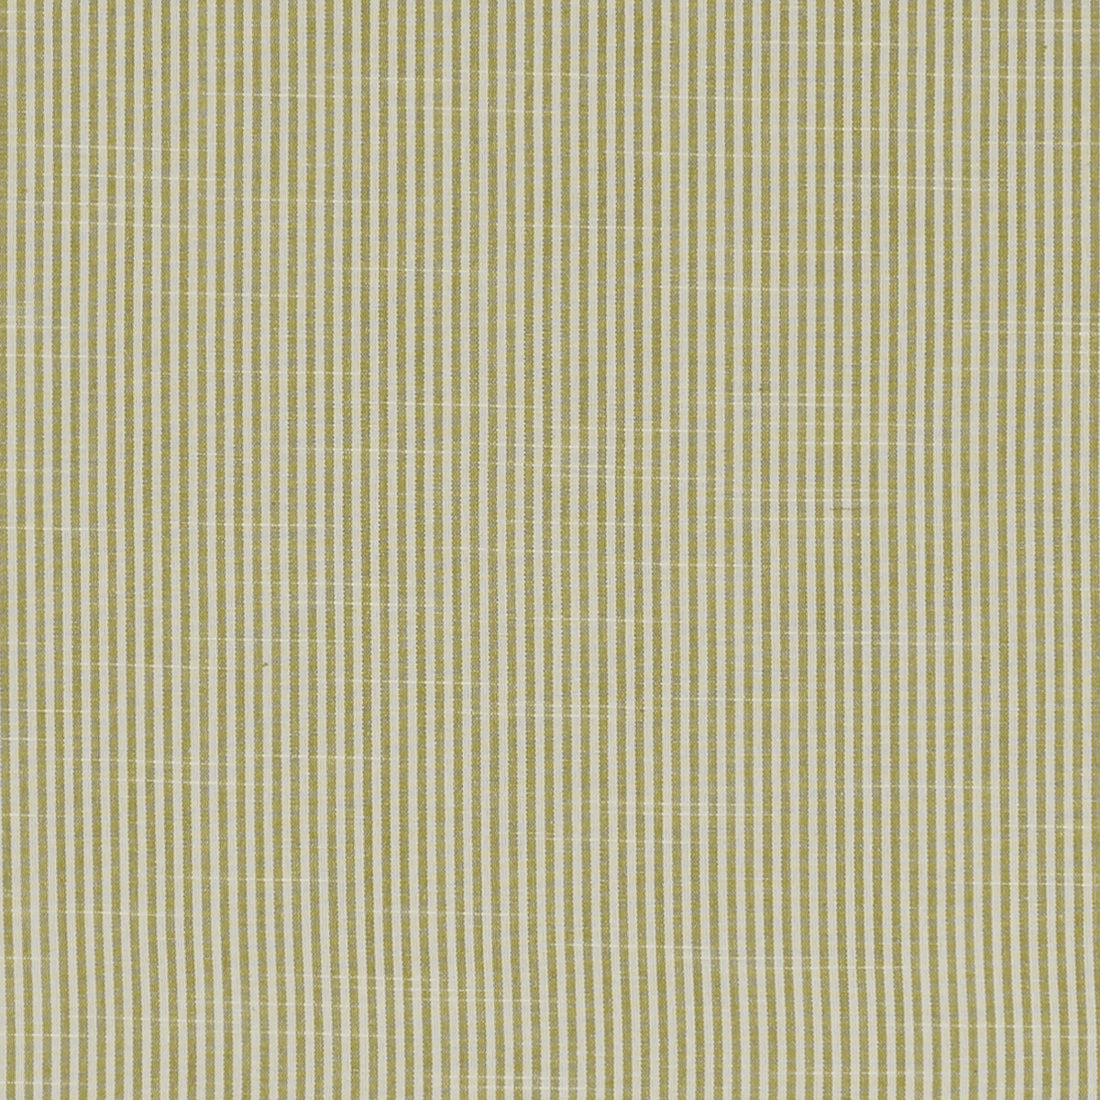 Bempton fabric in olive color - pattern F1307/08.CAC.0 - by Clarke And Clarke in the Bempton By Studio G For C&amp;C collection